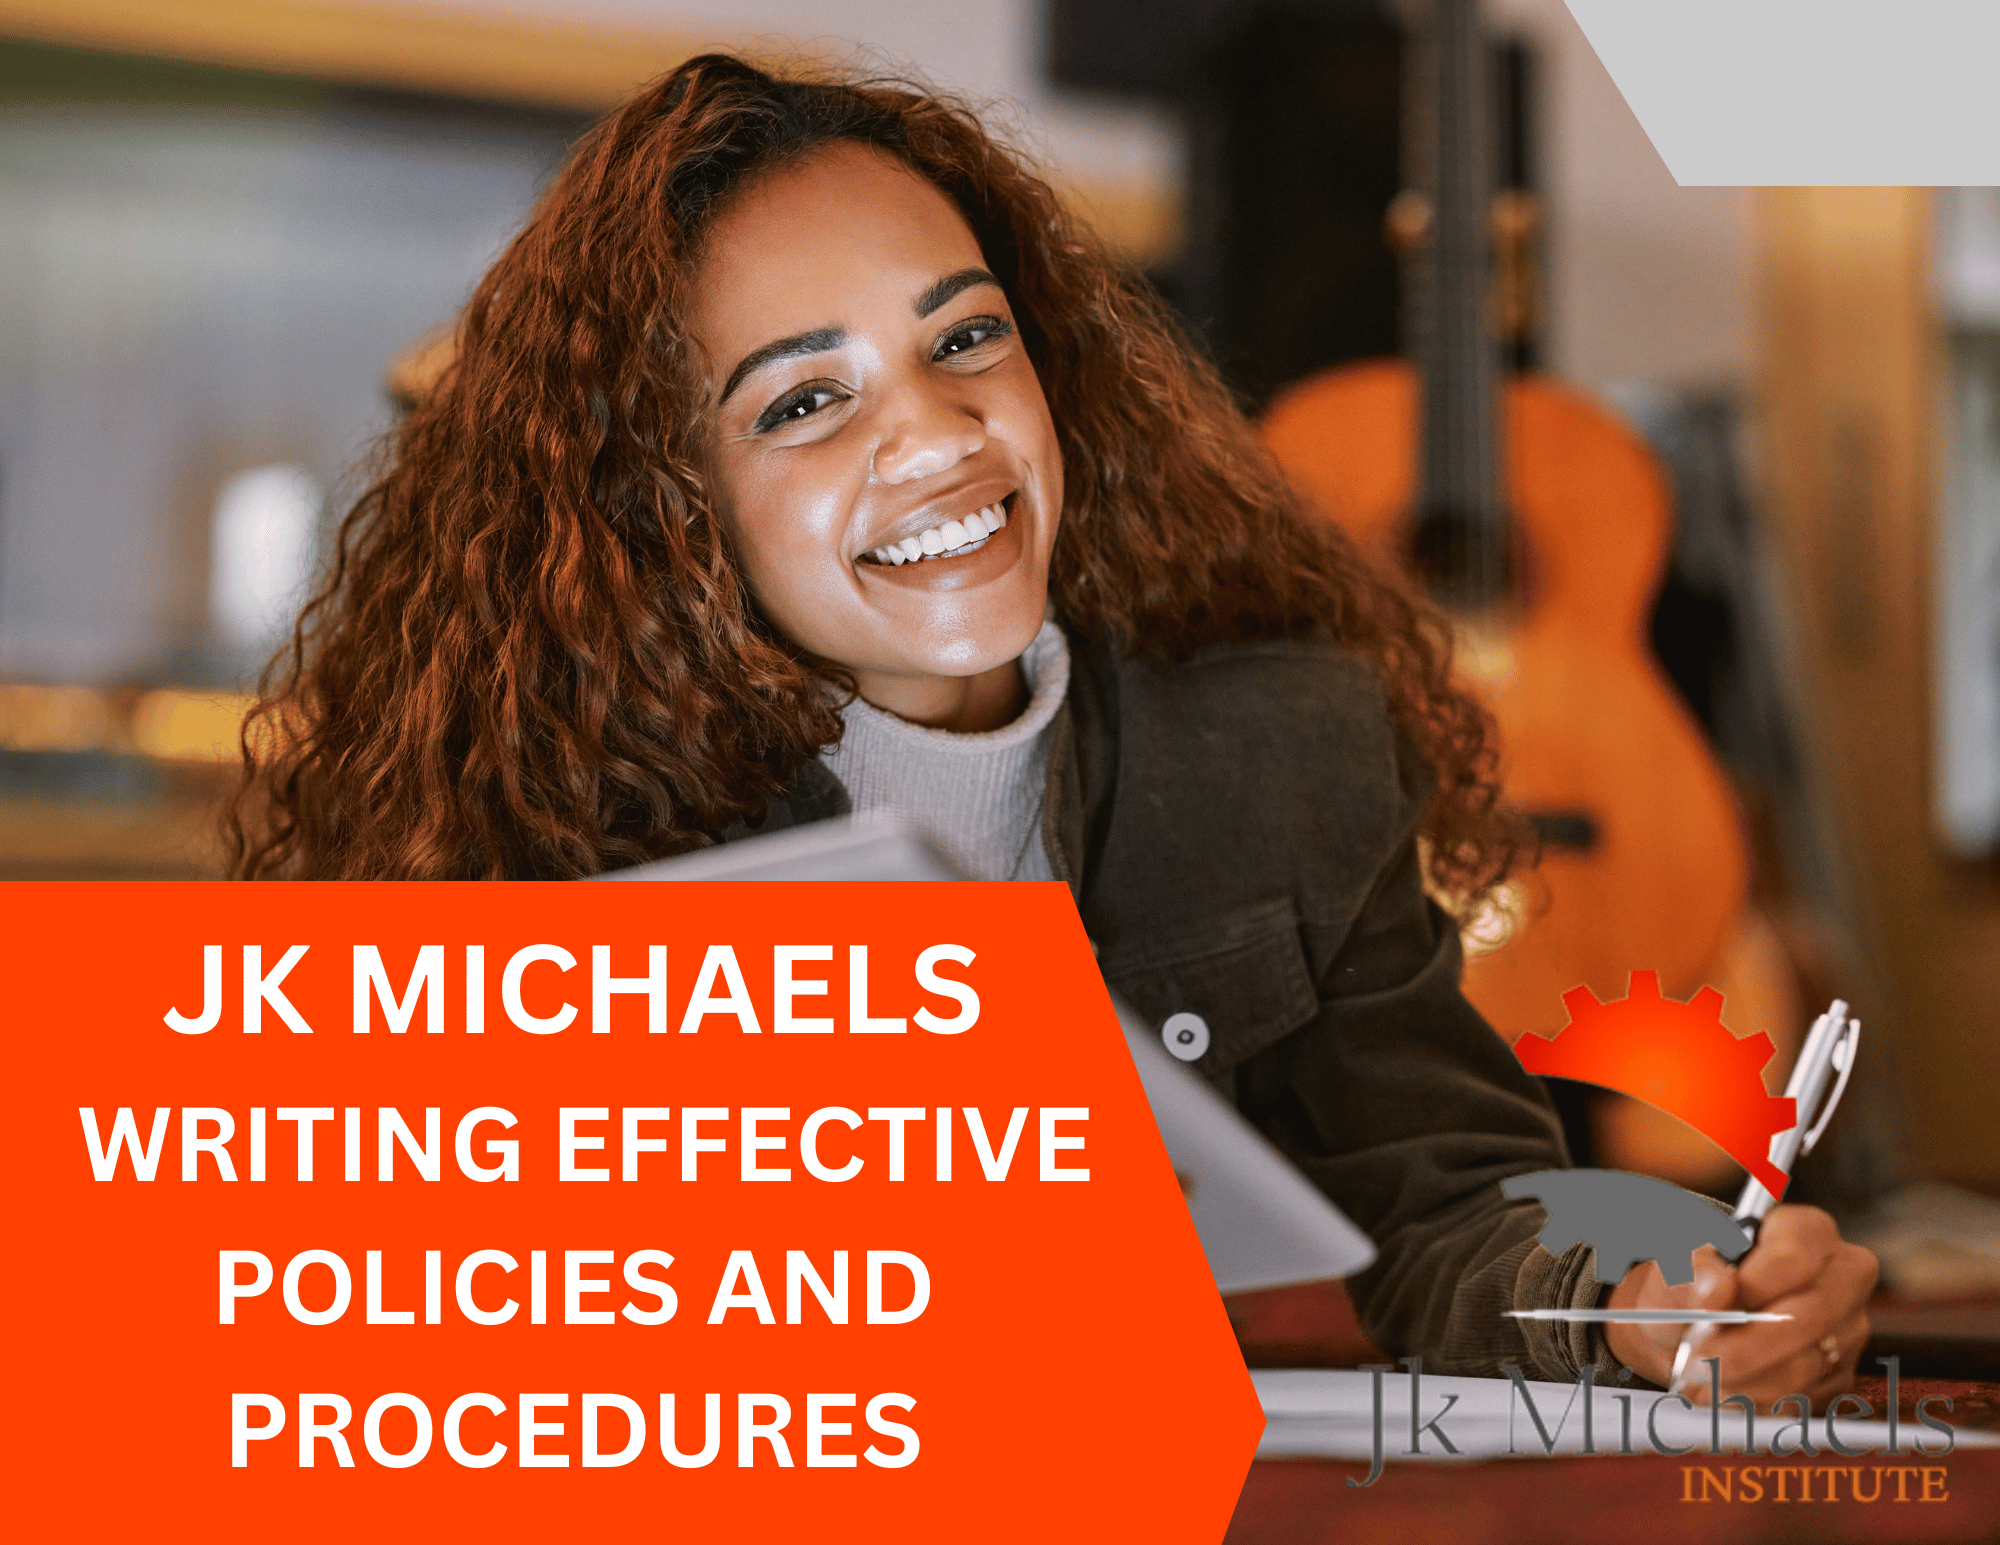 WRITING EFFECTIVE POLICIES AND PROCEDURES